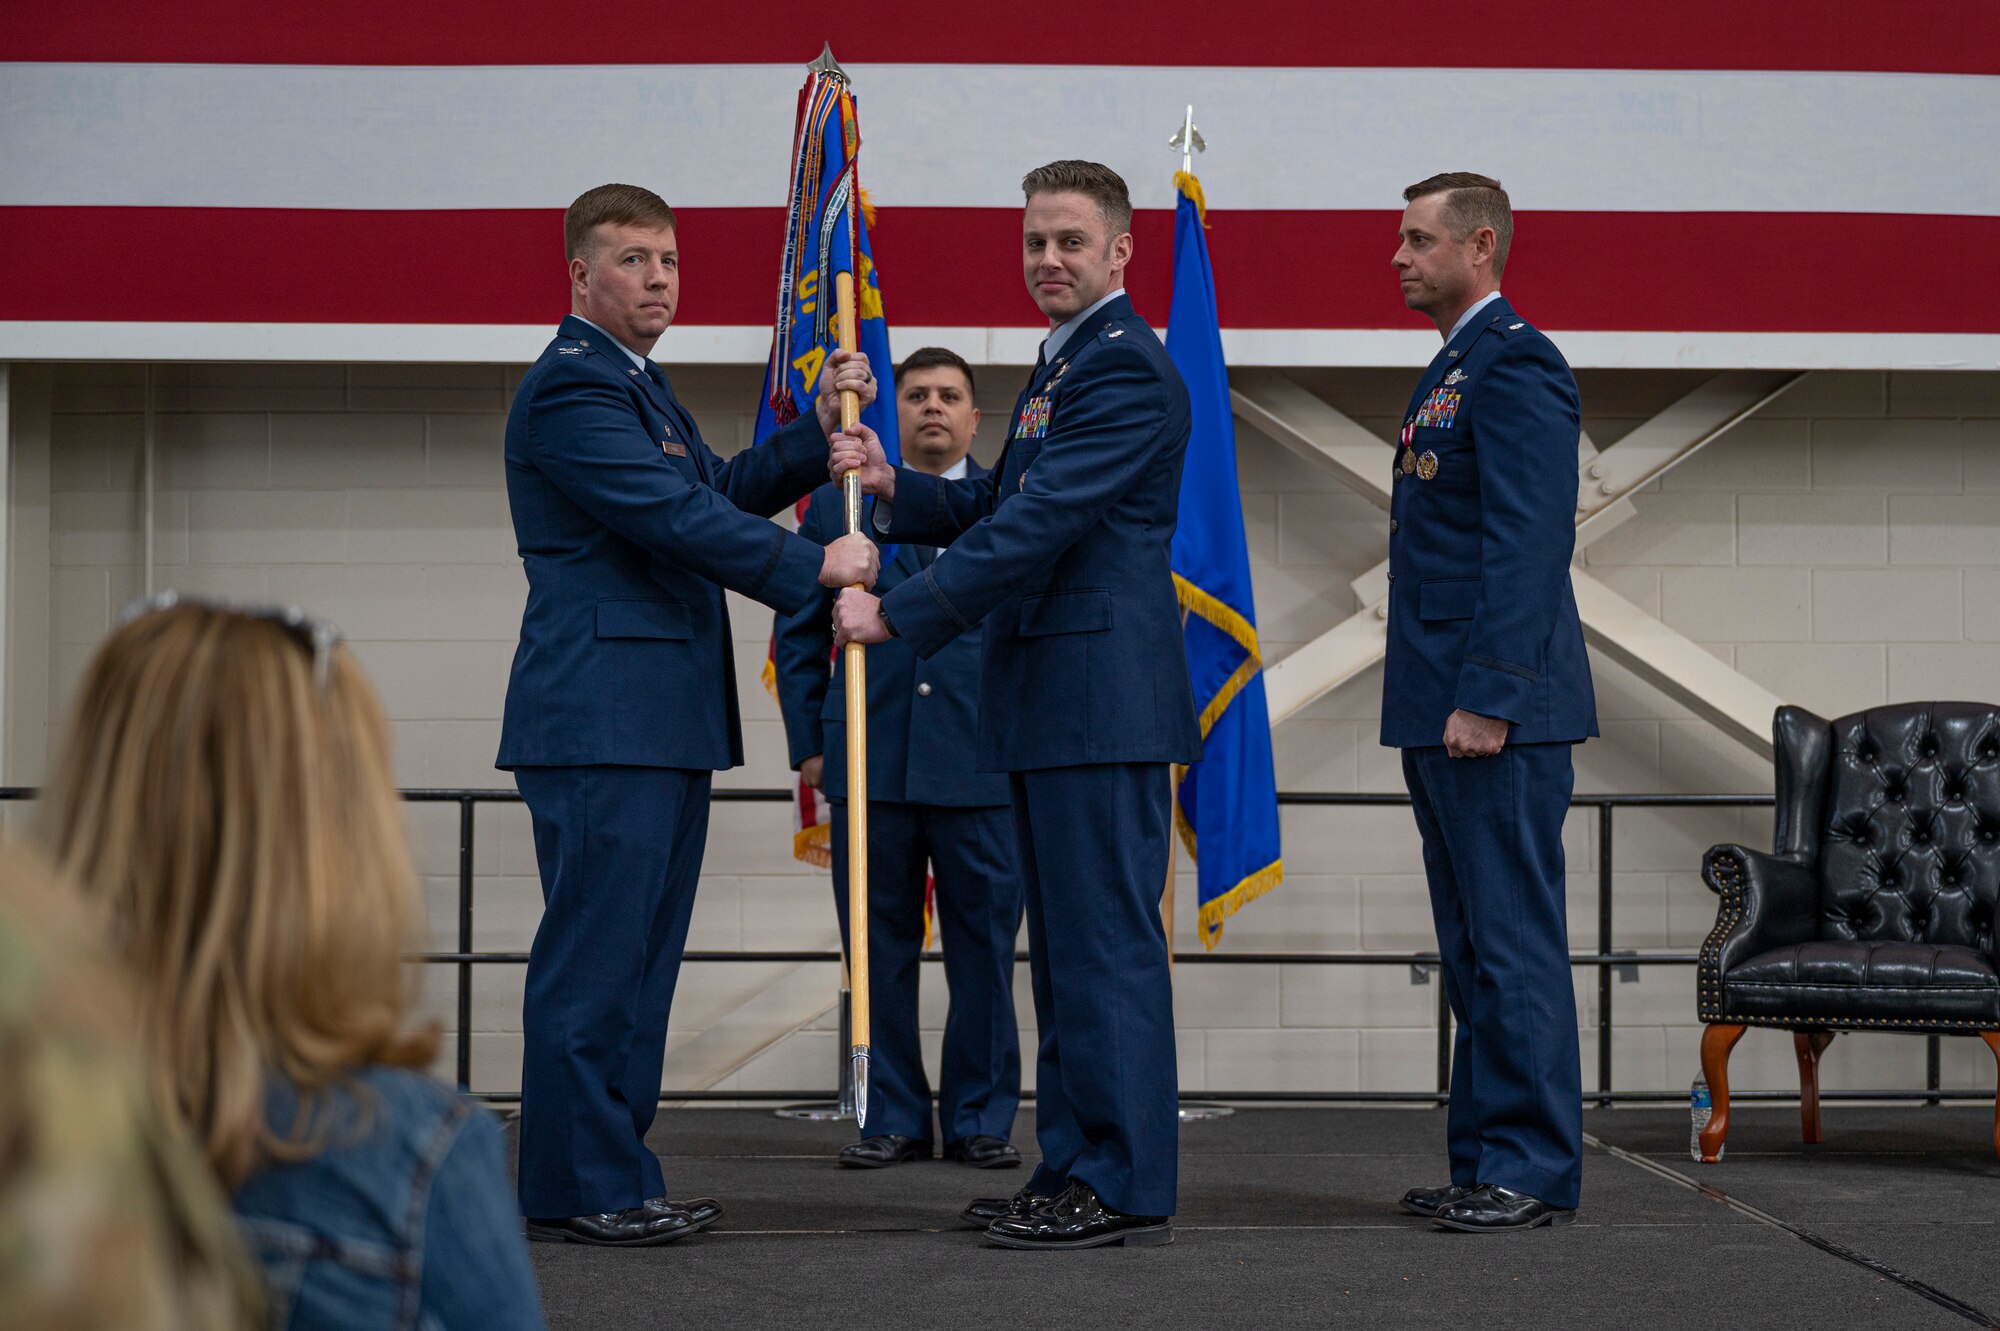 Col. John Poole, 317th Operations Group commander, hands the guidon to Lt. Col. Sean Stumpf, incoming 40th Airlift Squadron commander, during the 40th AS change of command ceremony at Dyess Air Force Base, Texas, Feb. 3, 2023. The 40th AS supports theater commanders' requirements with combat-delivery capability through tactical airland and airdrop operations as well as humanitarian efforts and aeromedical evacuation. (U.S. Air Force photo by Senior Airman Colin Hollowell)